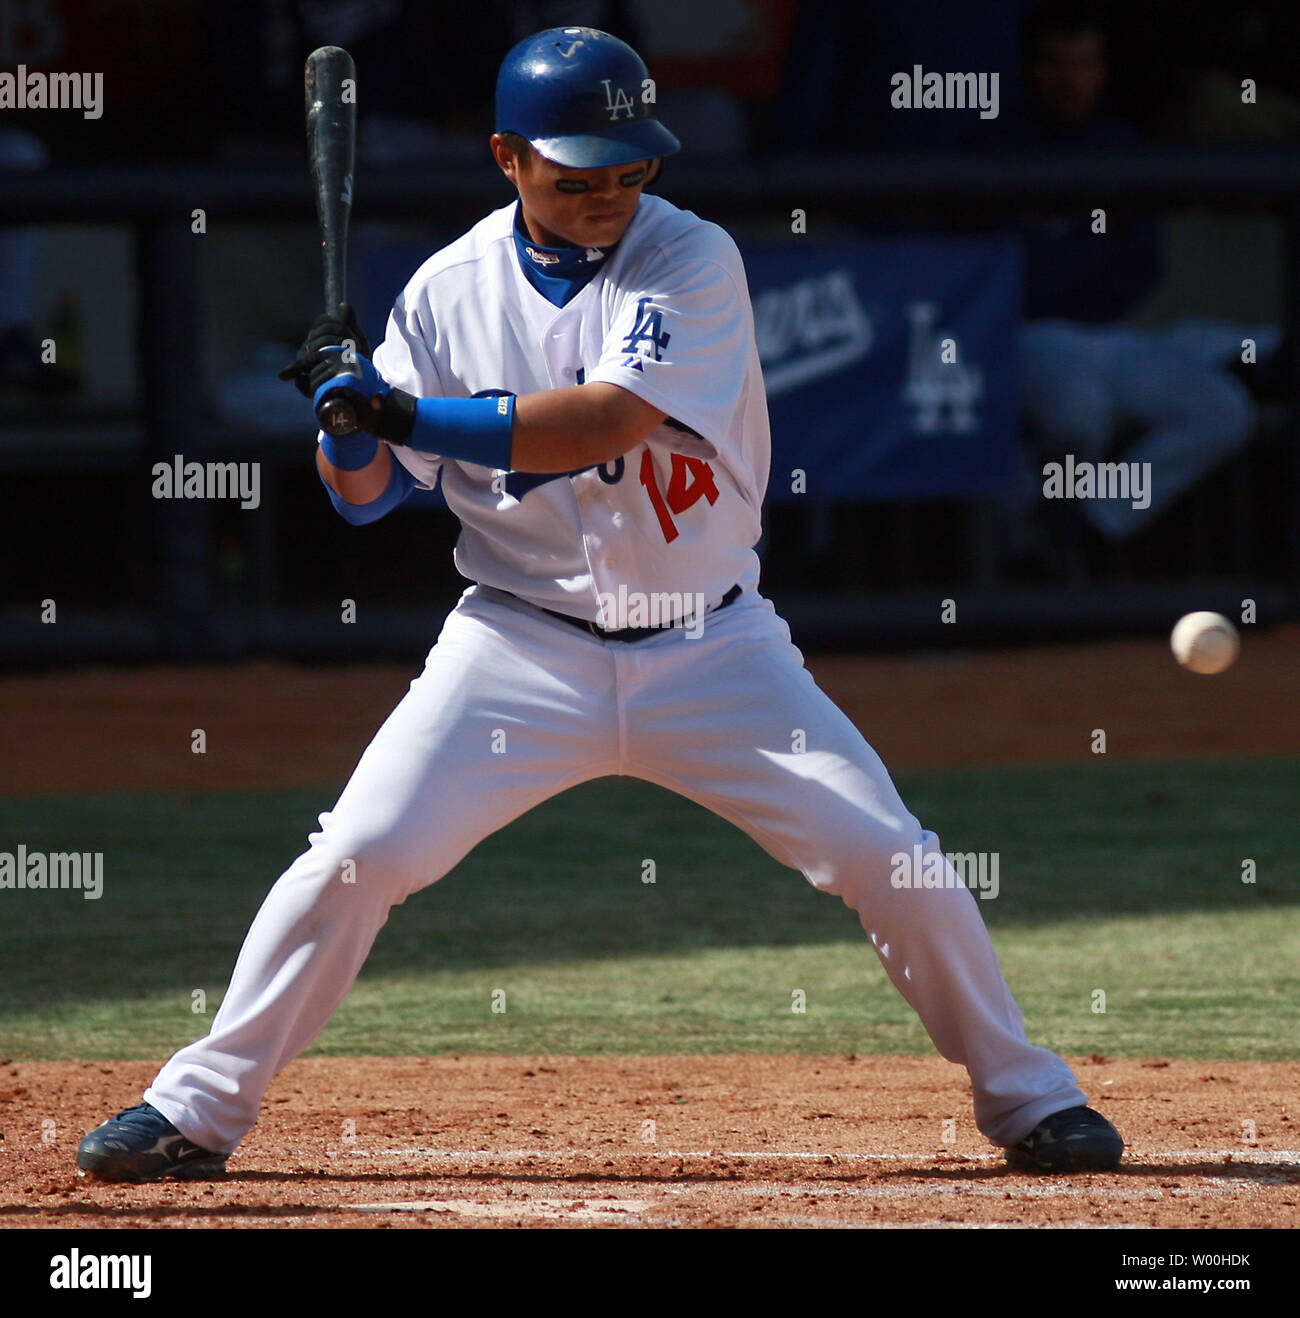 Los Angeles Dodgers Chin-lung Hu swings at a ball during an exhibition game against the San Diego Padres at Wukesong Stadium in Beijing March 15, 2008. The Dodgers and Padres shared the honors when Major League Baseball made its debut in China with a spring-training tied game.  (UPI Photo/Stephen Shaver) Stock Photo